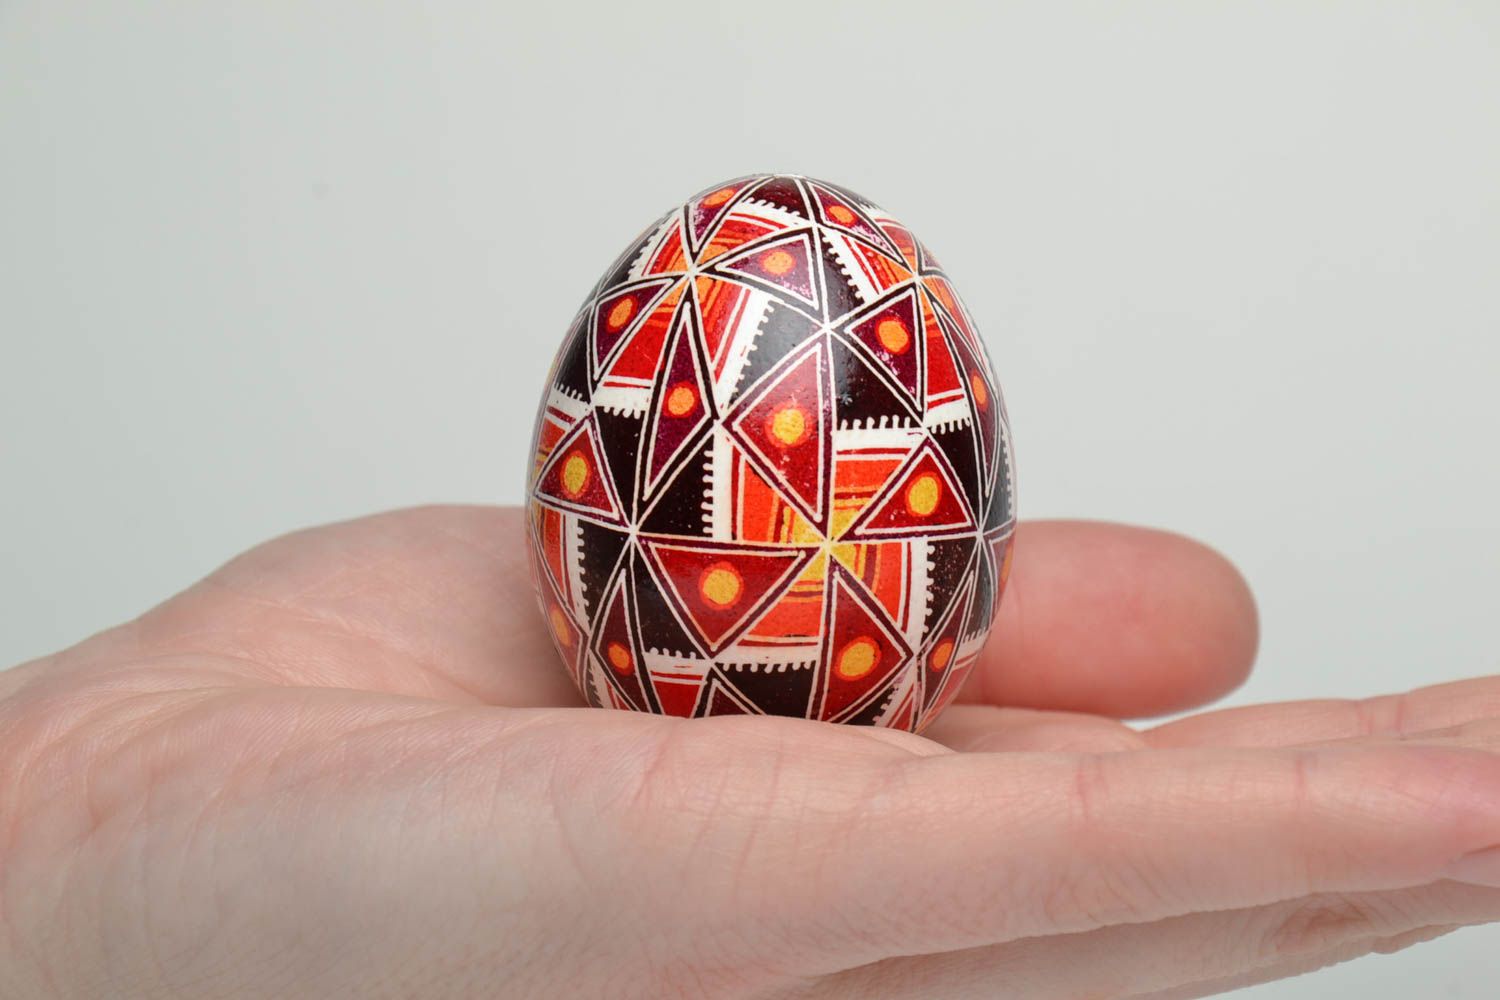 Handmade Easter egg with patterns photo 5